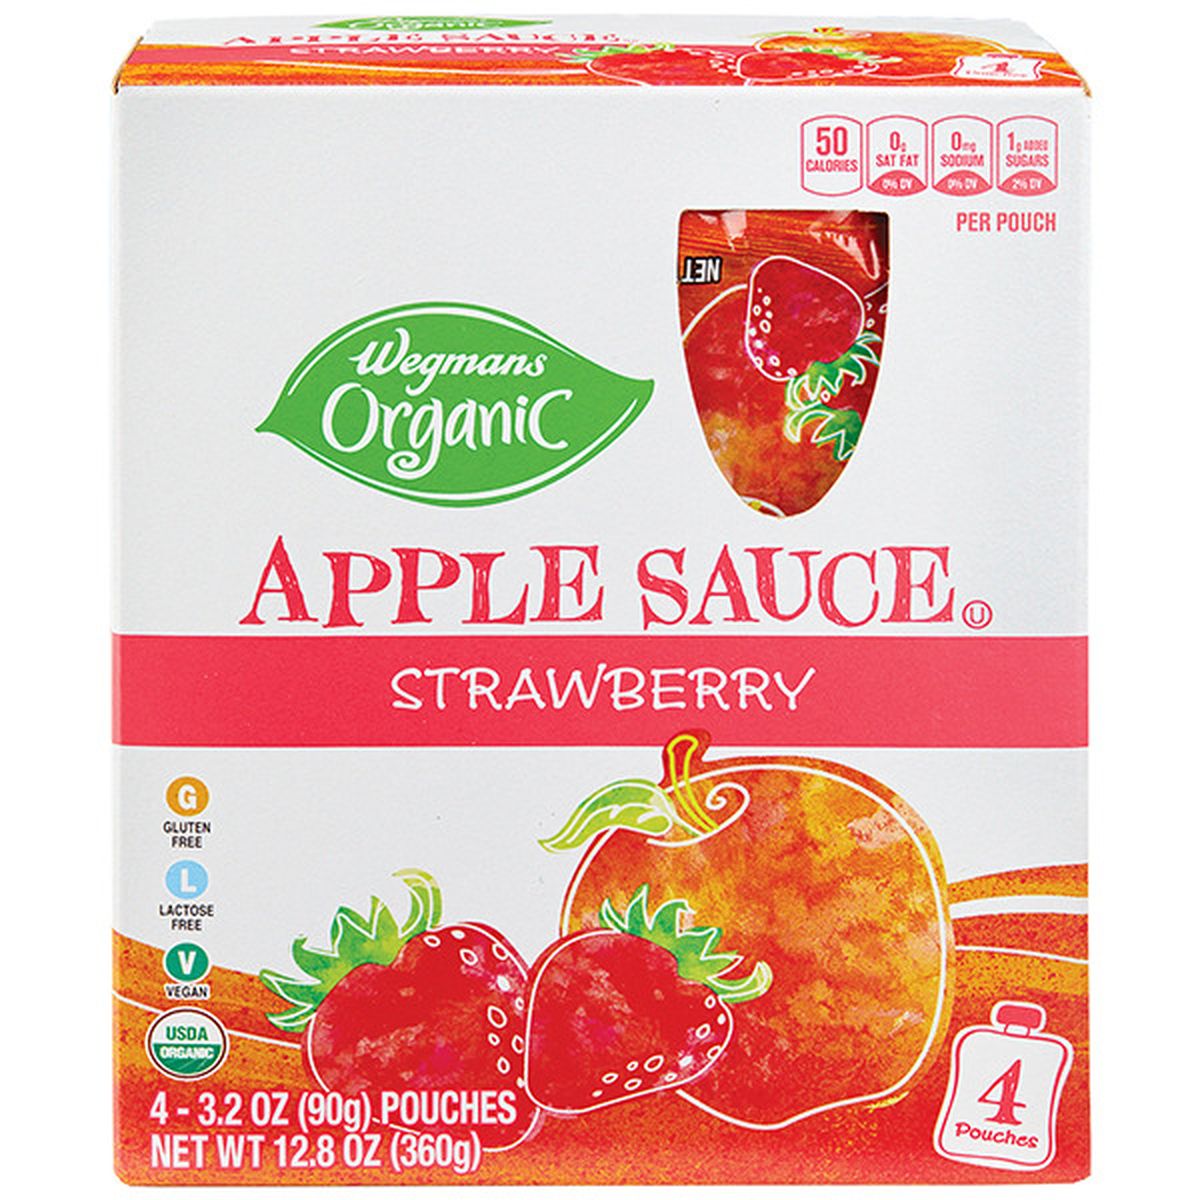 Calories in Wegmans Organic Strawberry Apple Sauce Pouches, 4 Pack